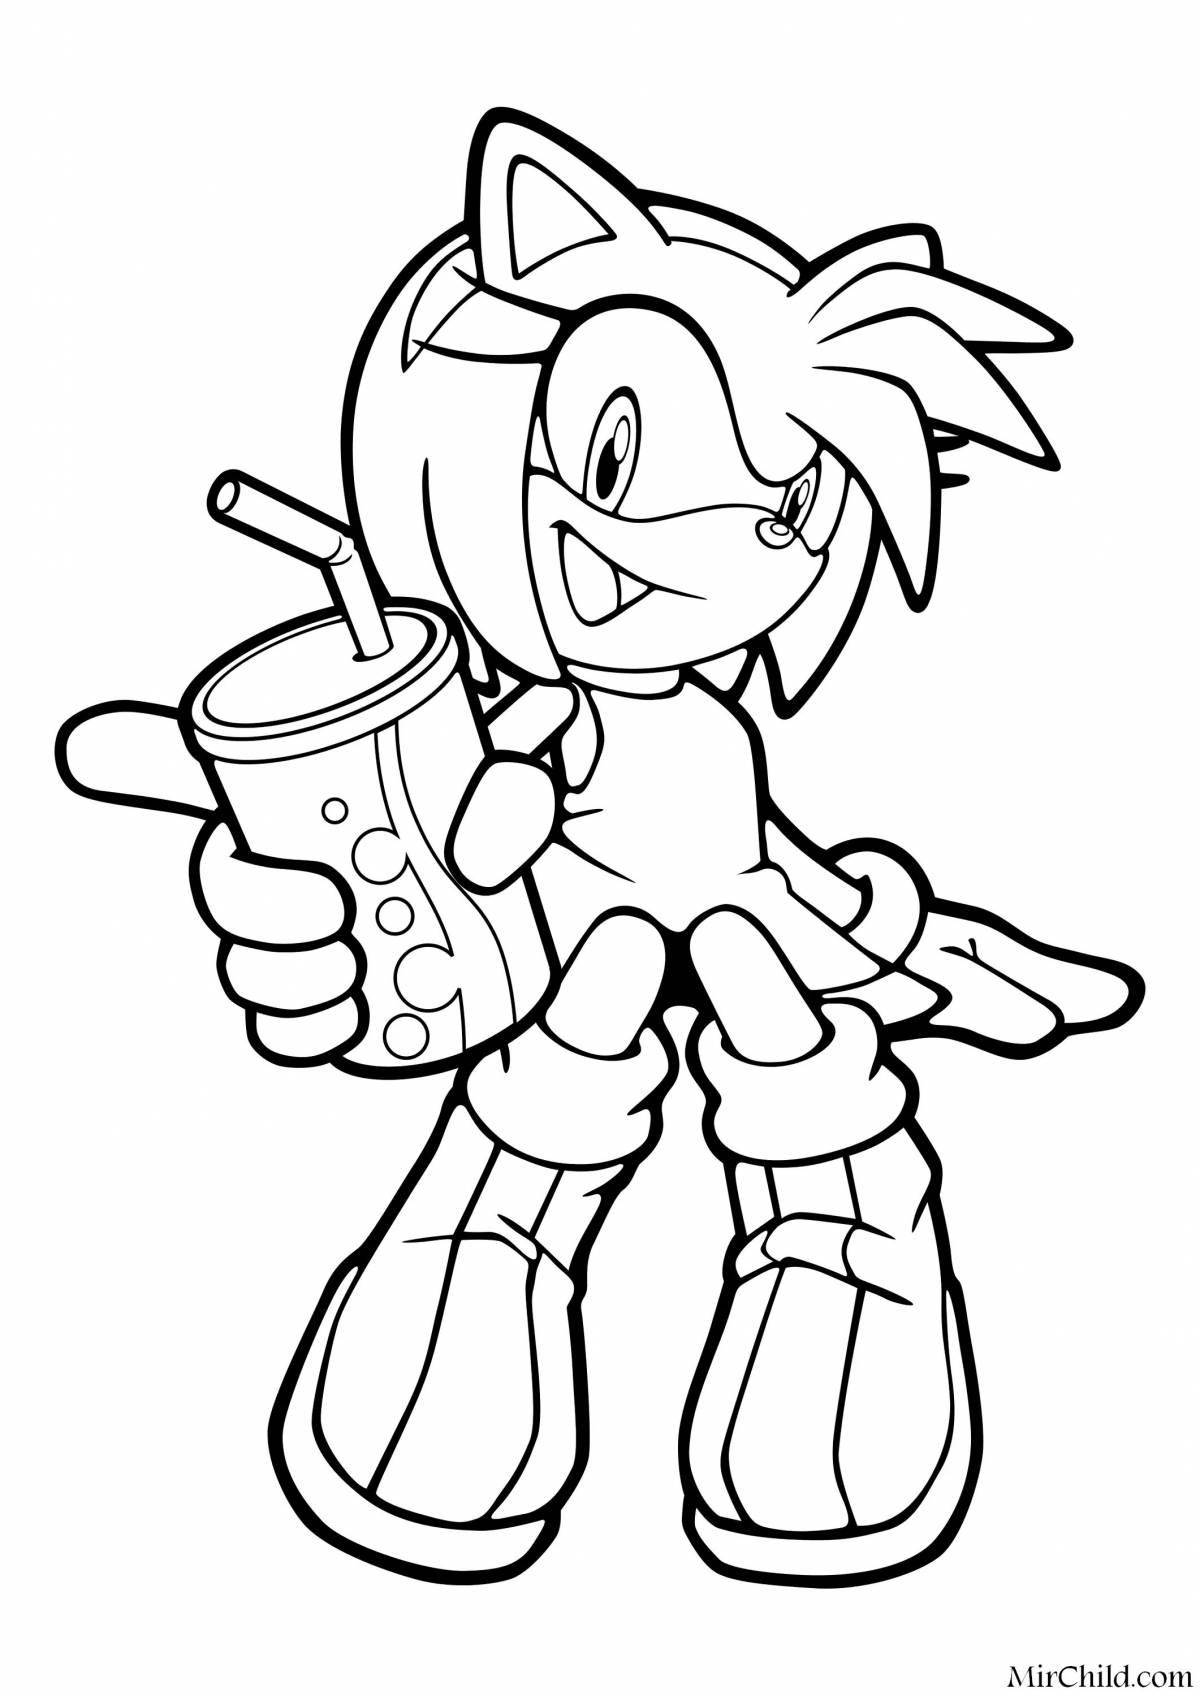 Coloring page holiday amy